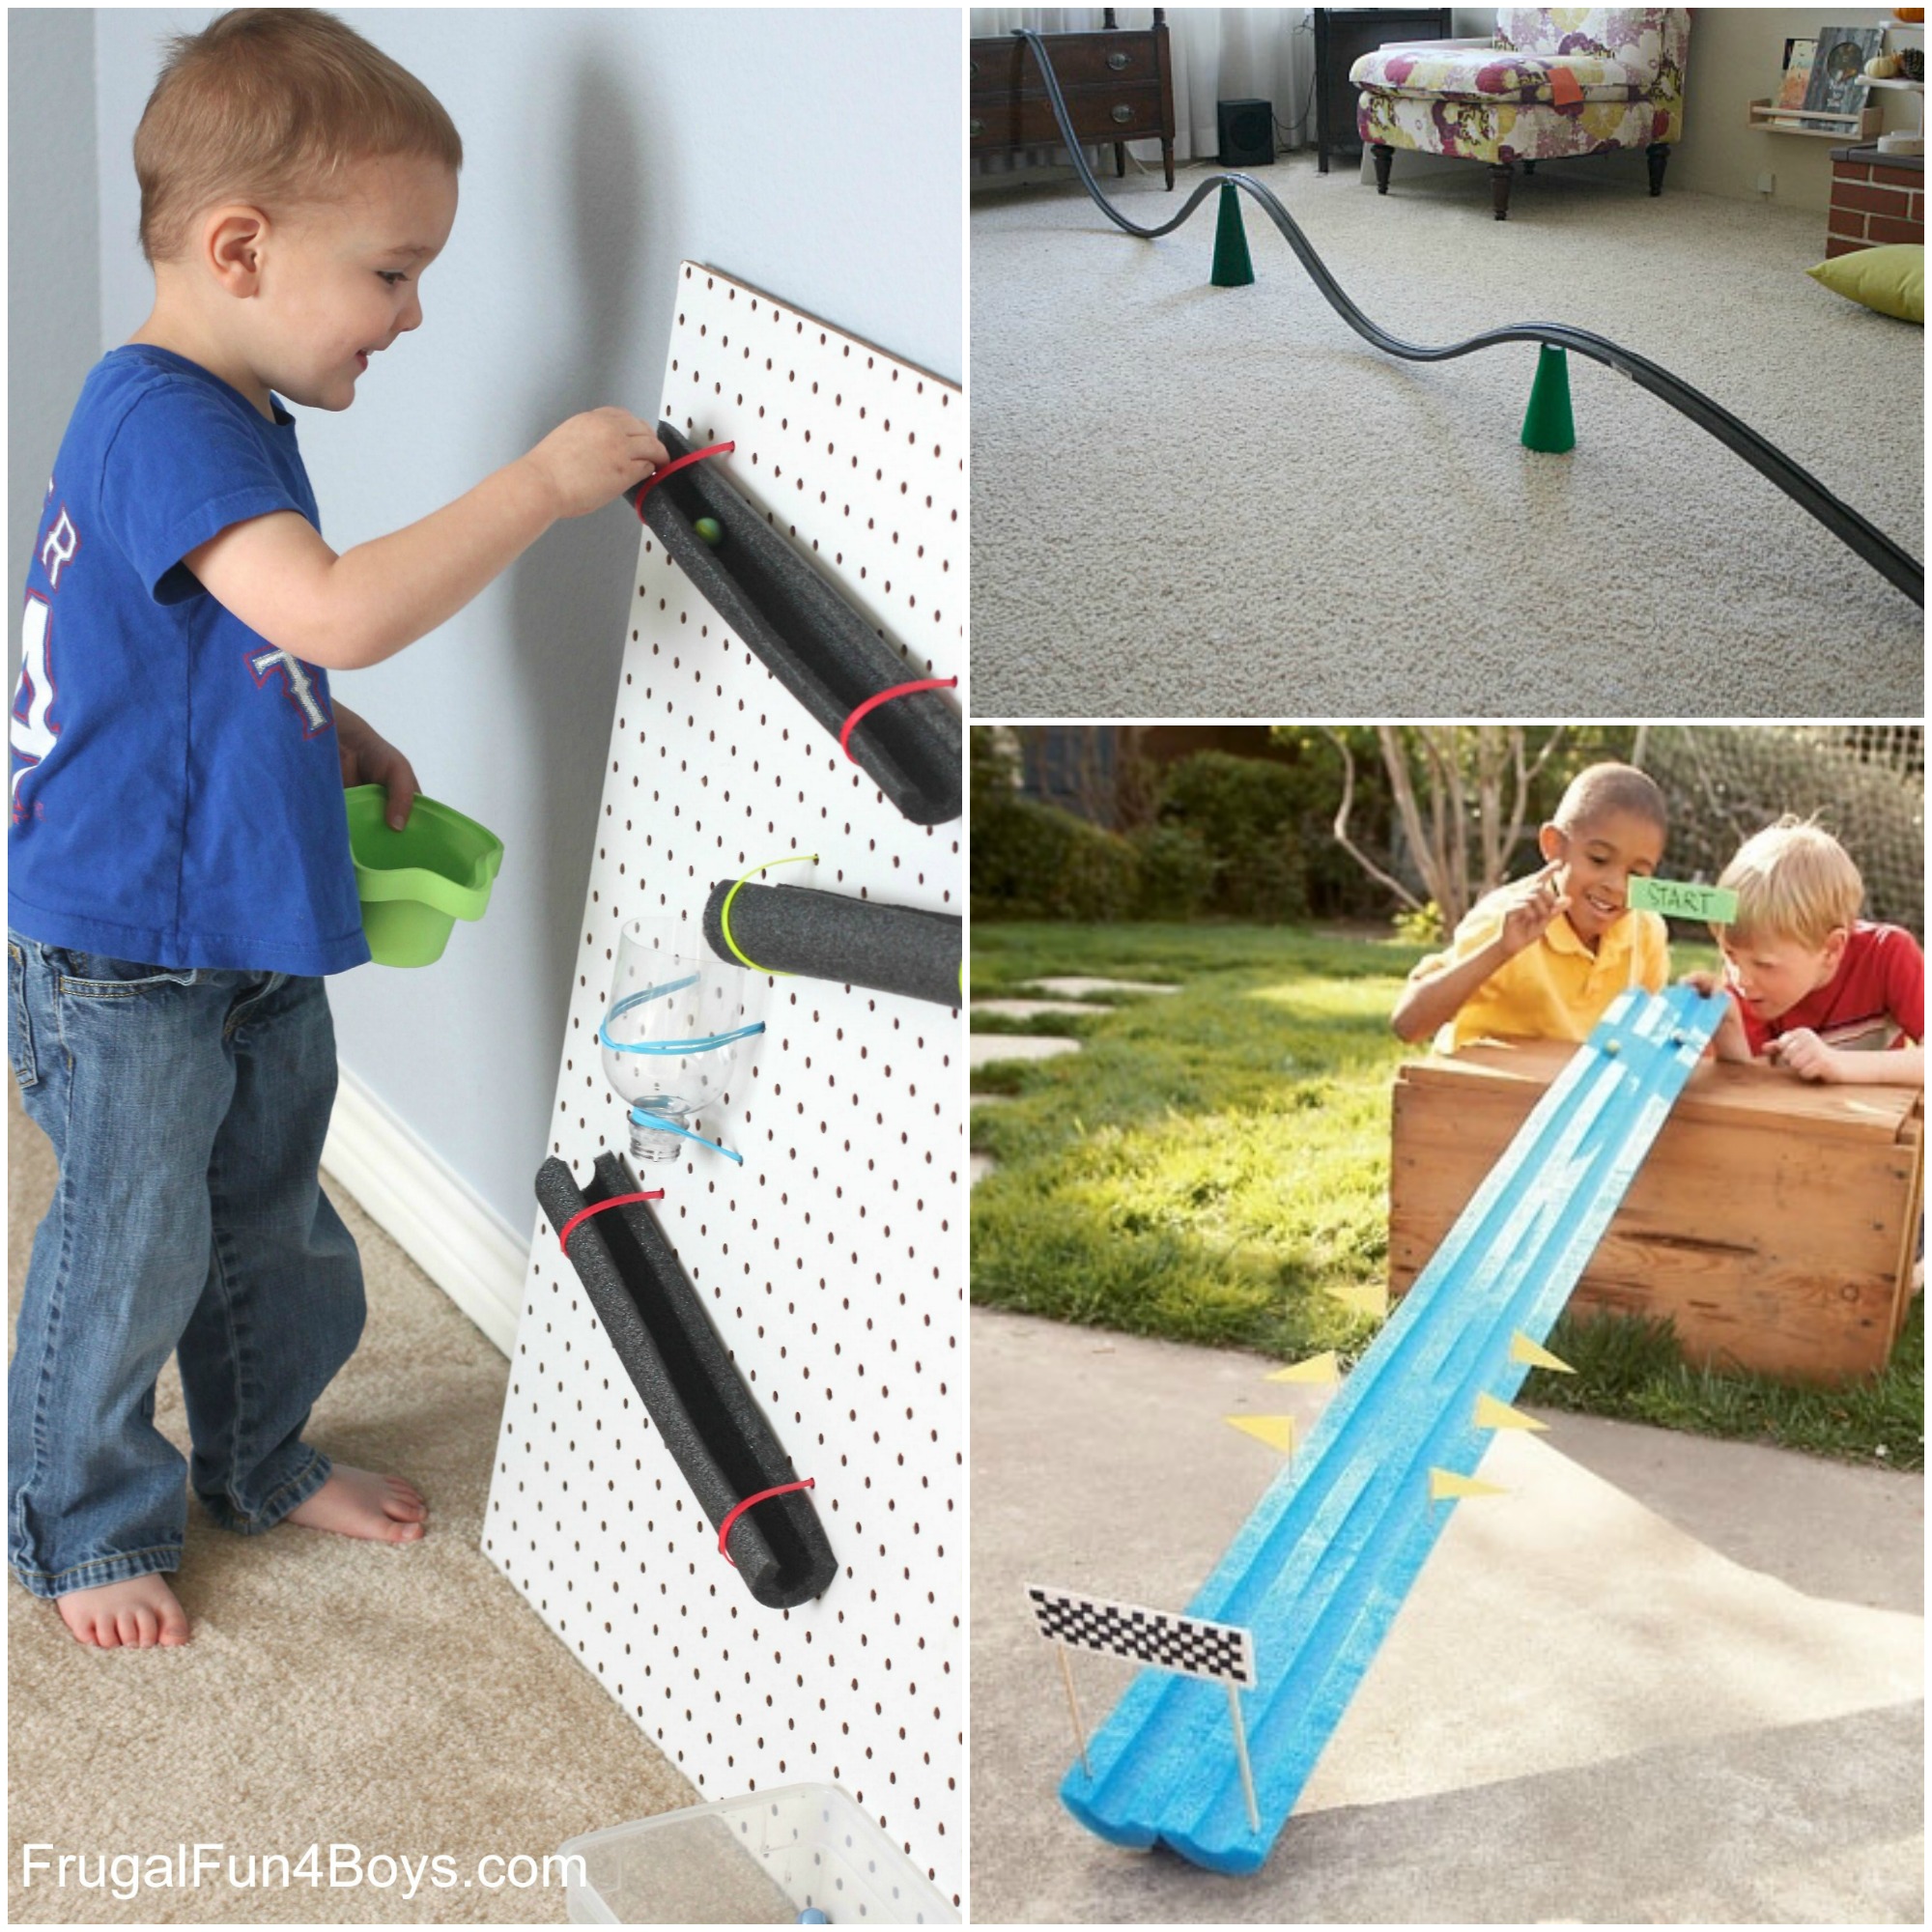 The Best Marble Runs for Kids to Build and Play